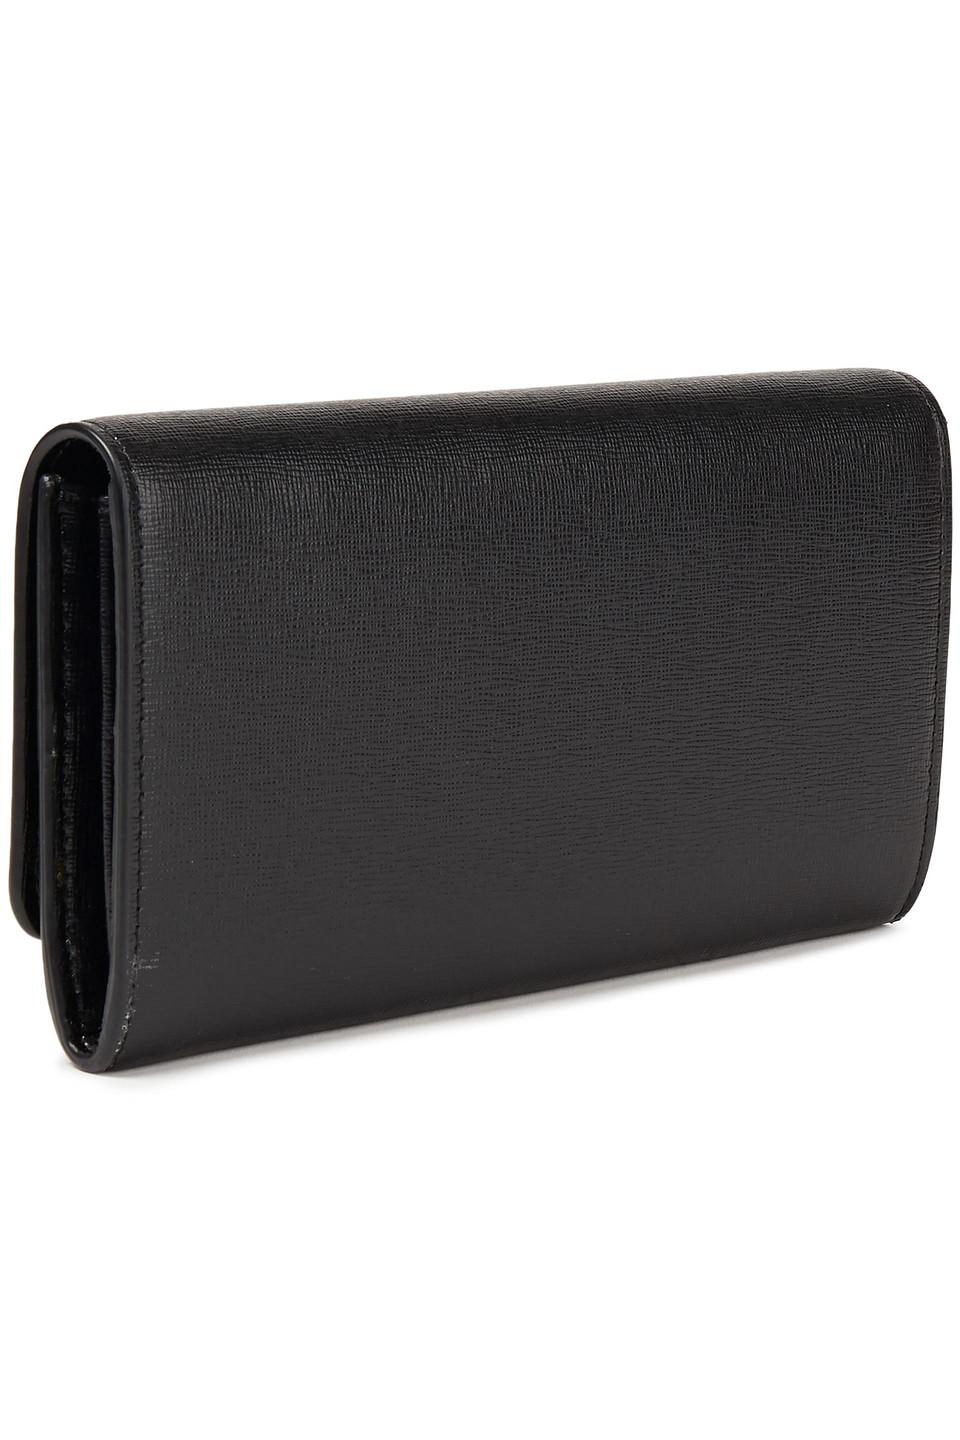 Sergio Rossi Textured-leather Wallet in Black | Lyst